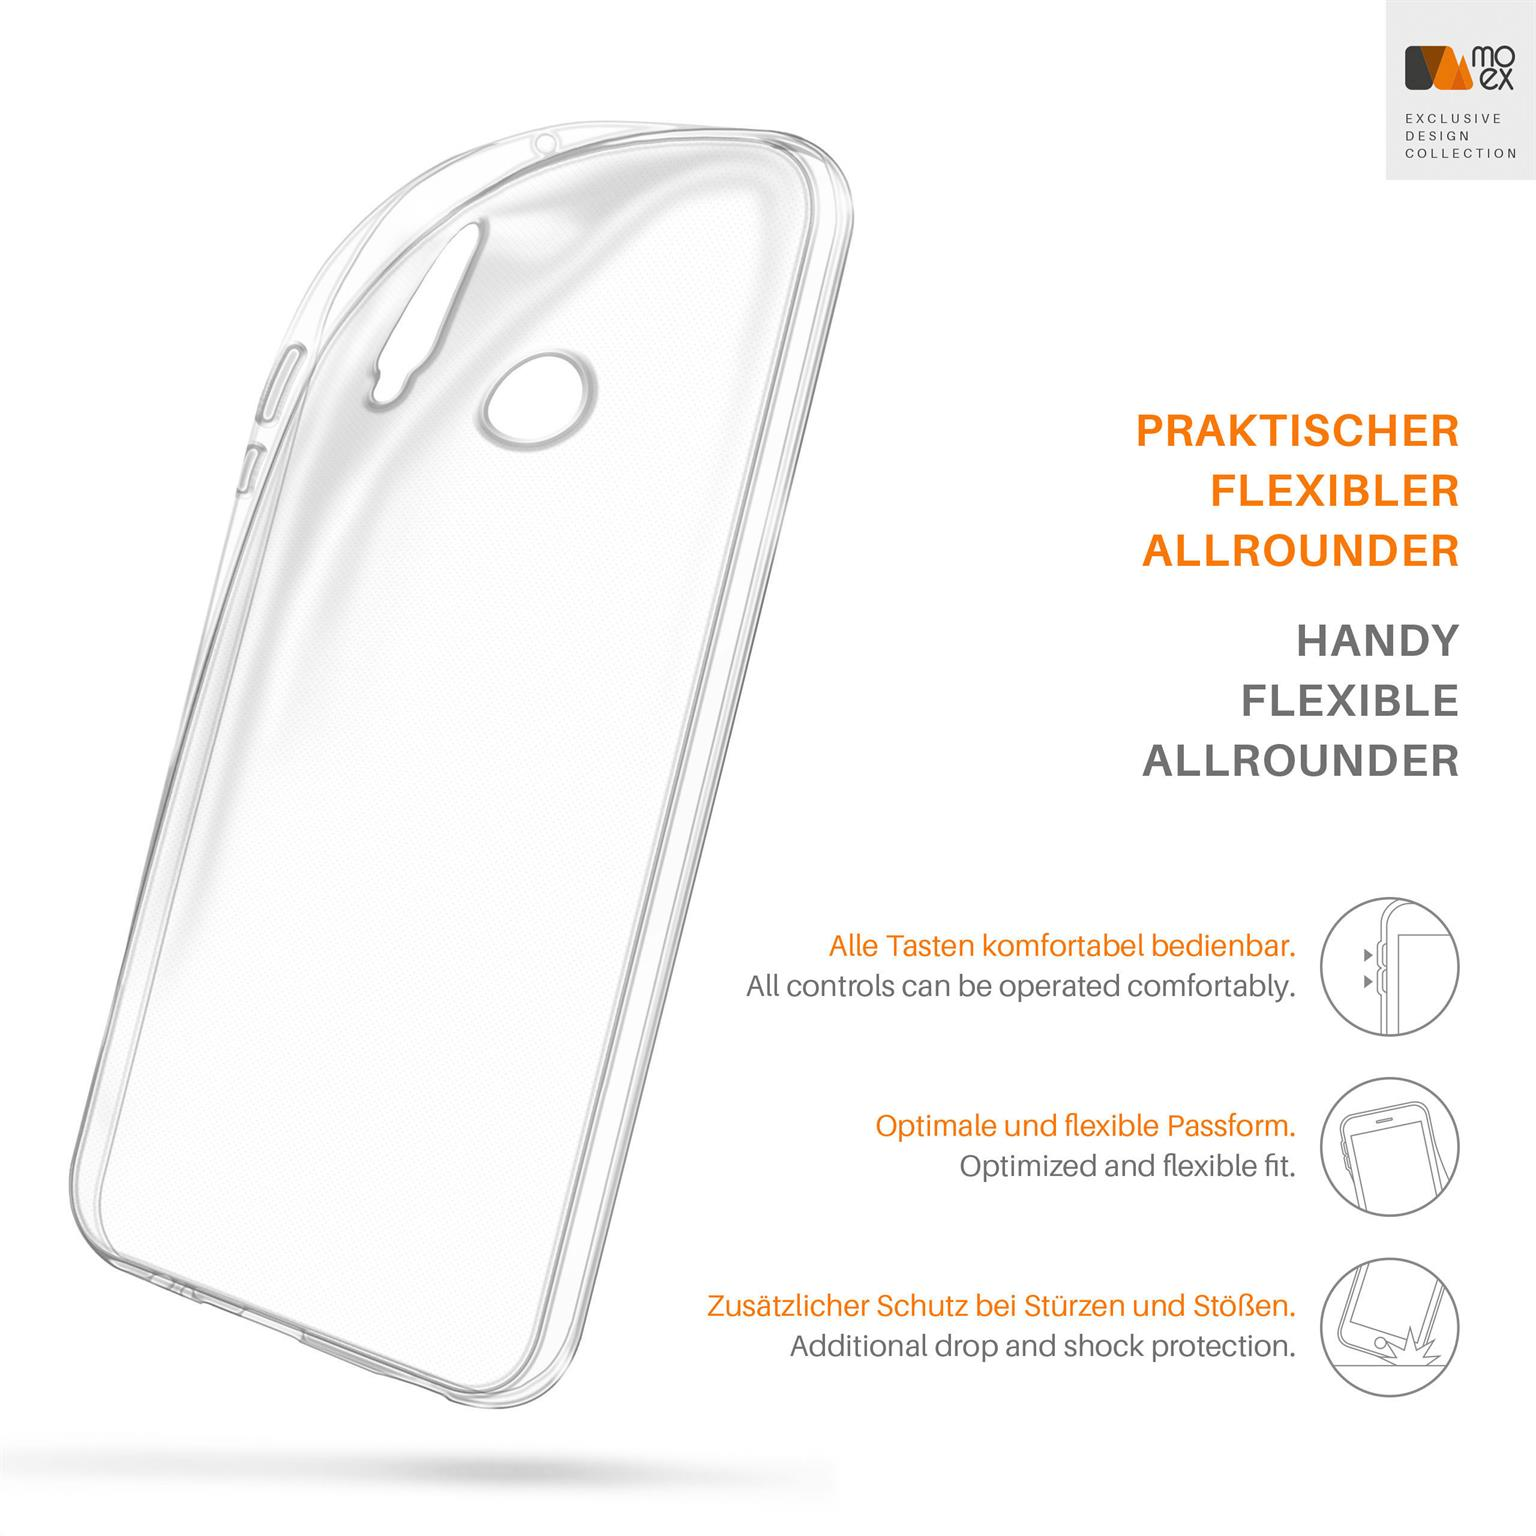 Lite, Aero Huawei, Case, Crystal-Clear Backcover, MOEX P20